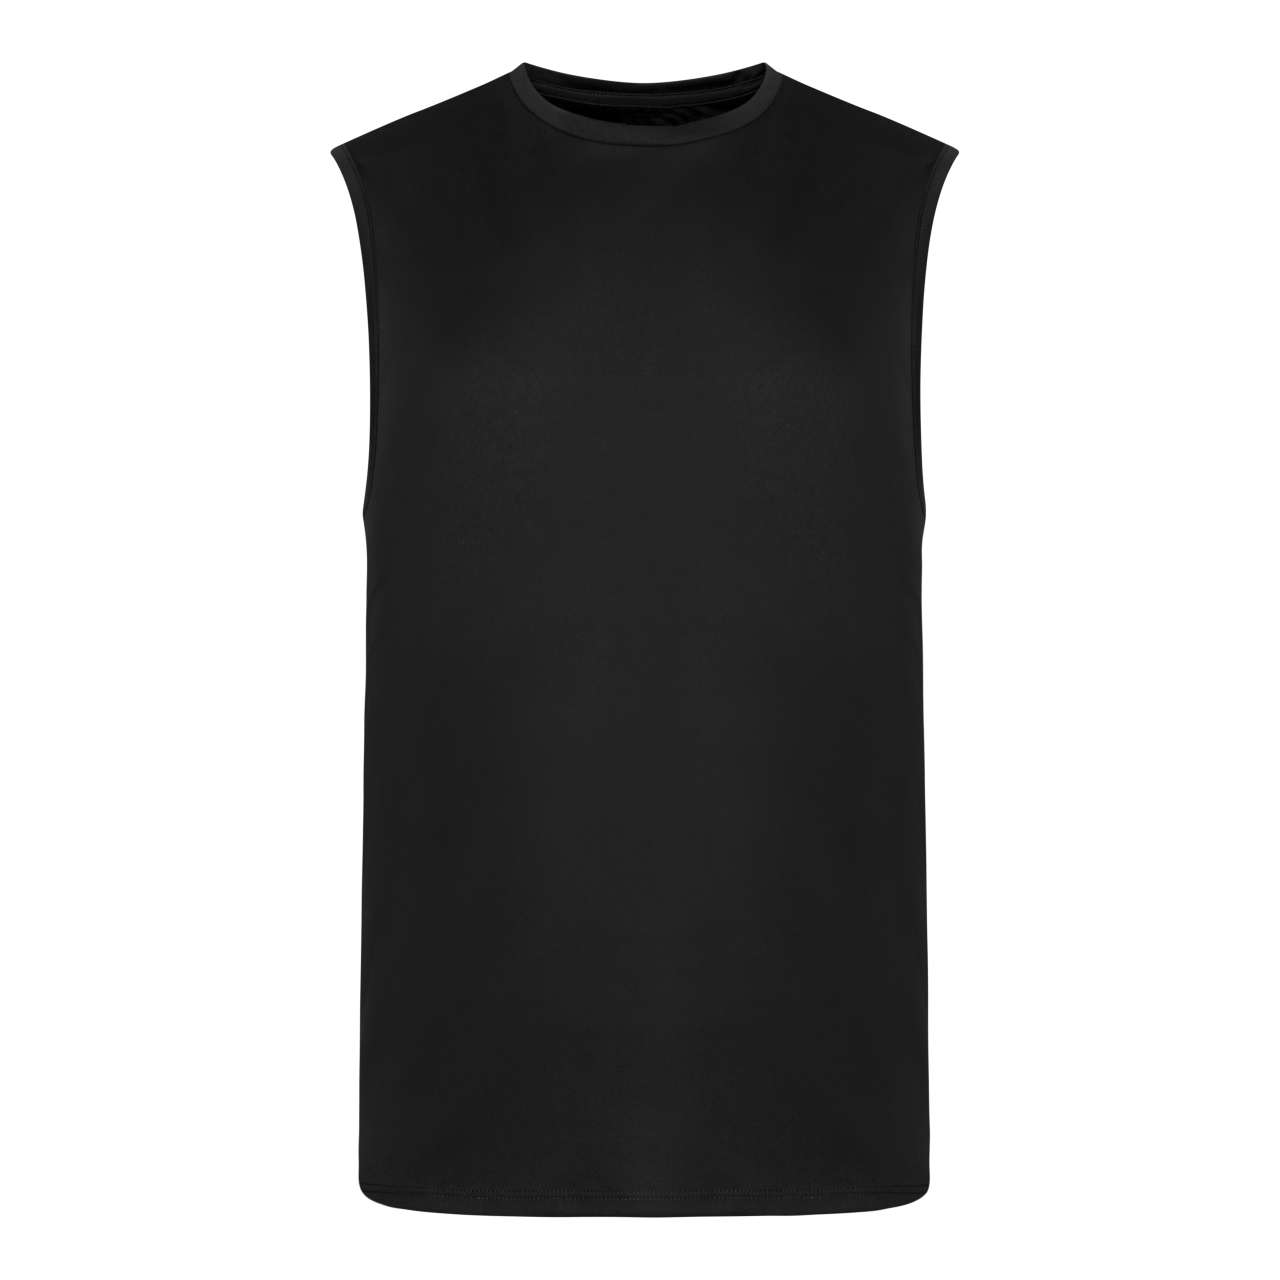 Promo  MENS COOL SMOOTH SPORTS VEST